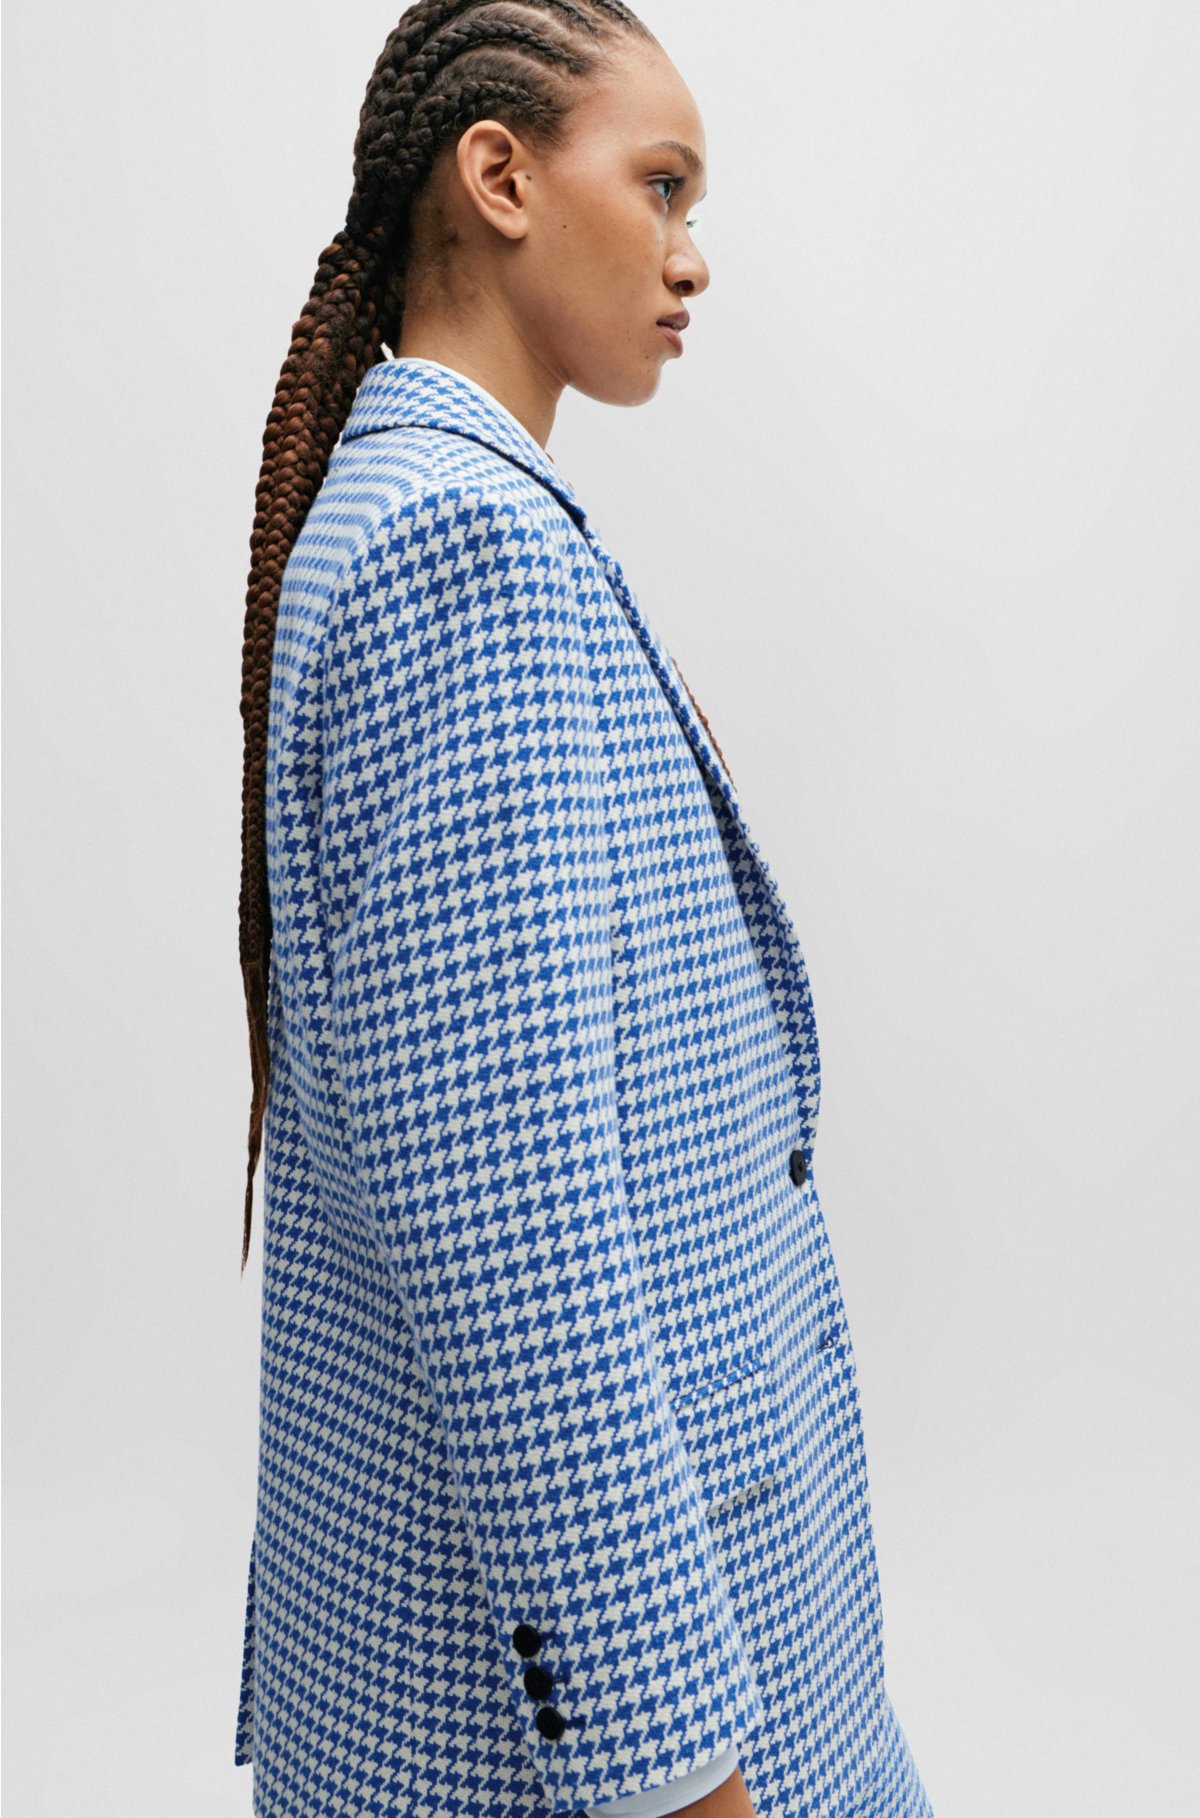 Oversized-fit jacket in a houndstooth cotton blend, Blue Patterned